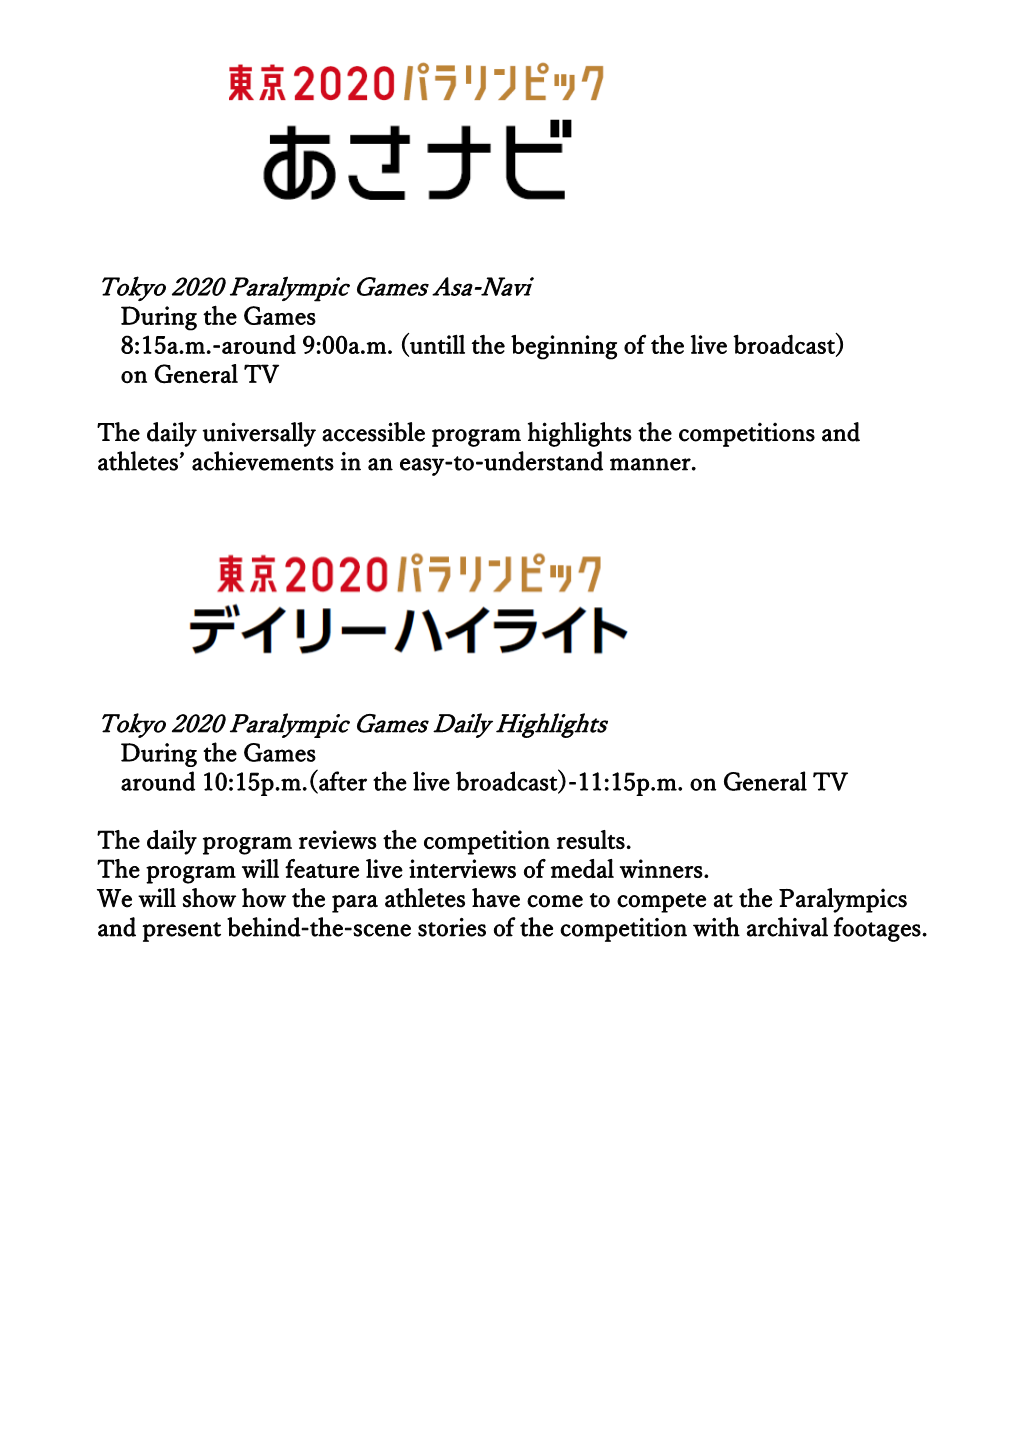 Details About the Tokyo 2020 Paralympic Games